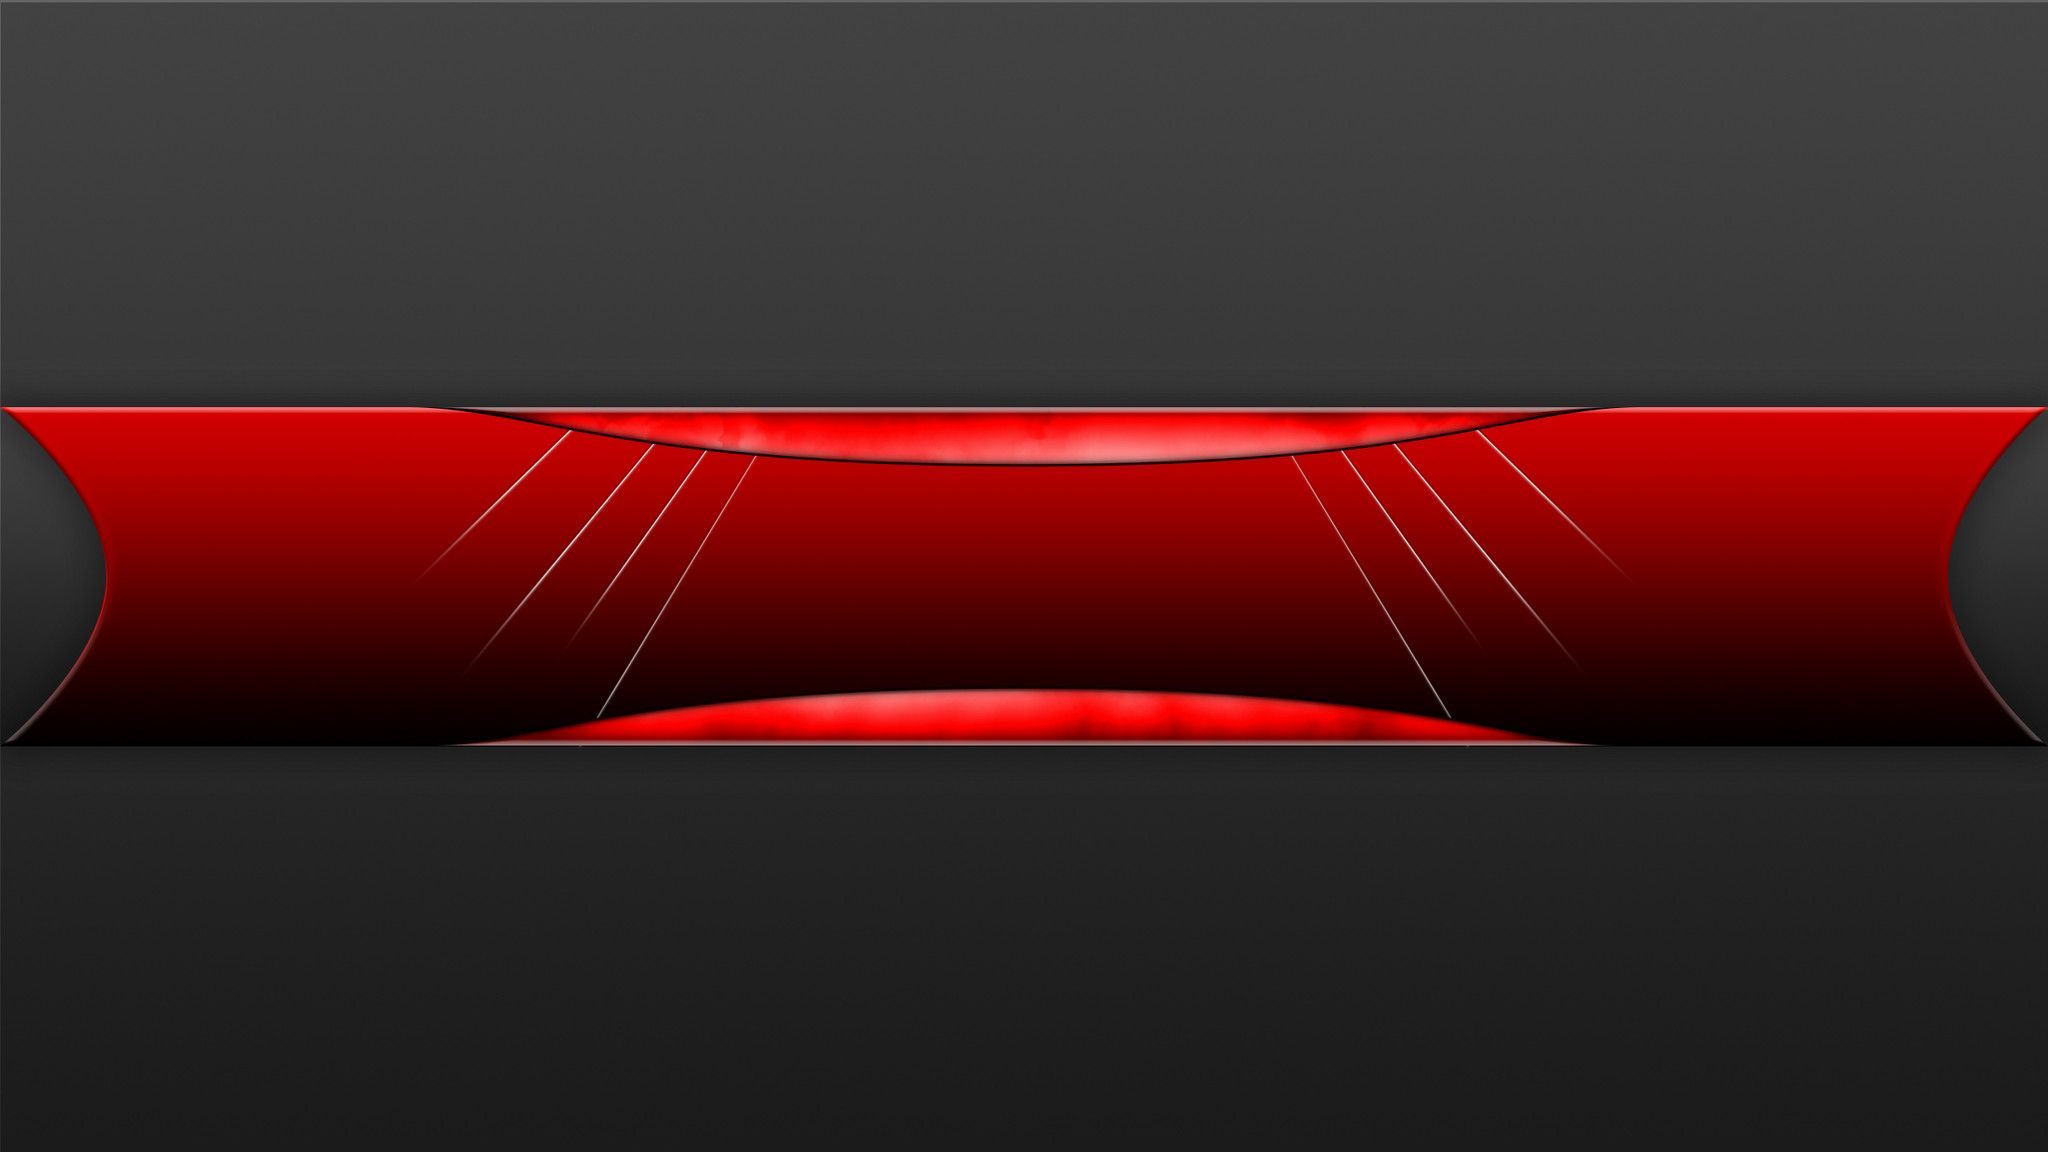 Black And Red Channel Art Wallpapers - Wallpaper Cave